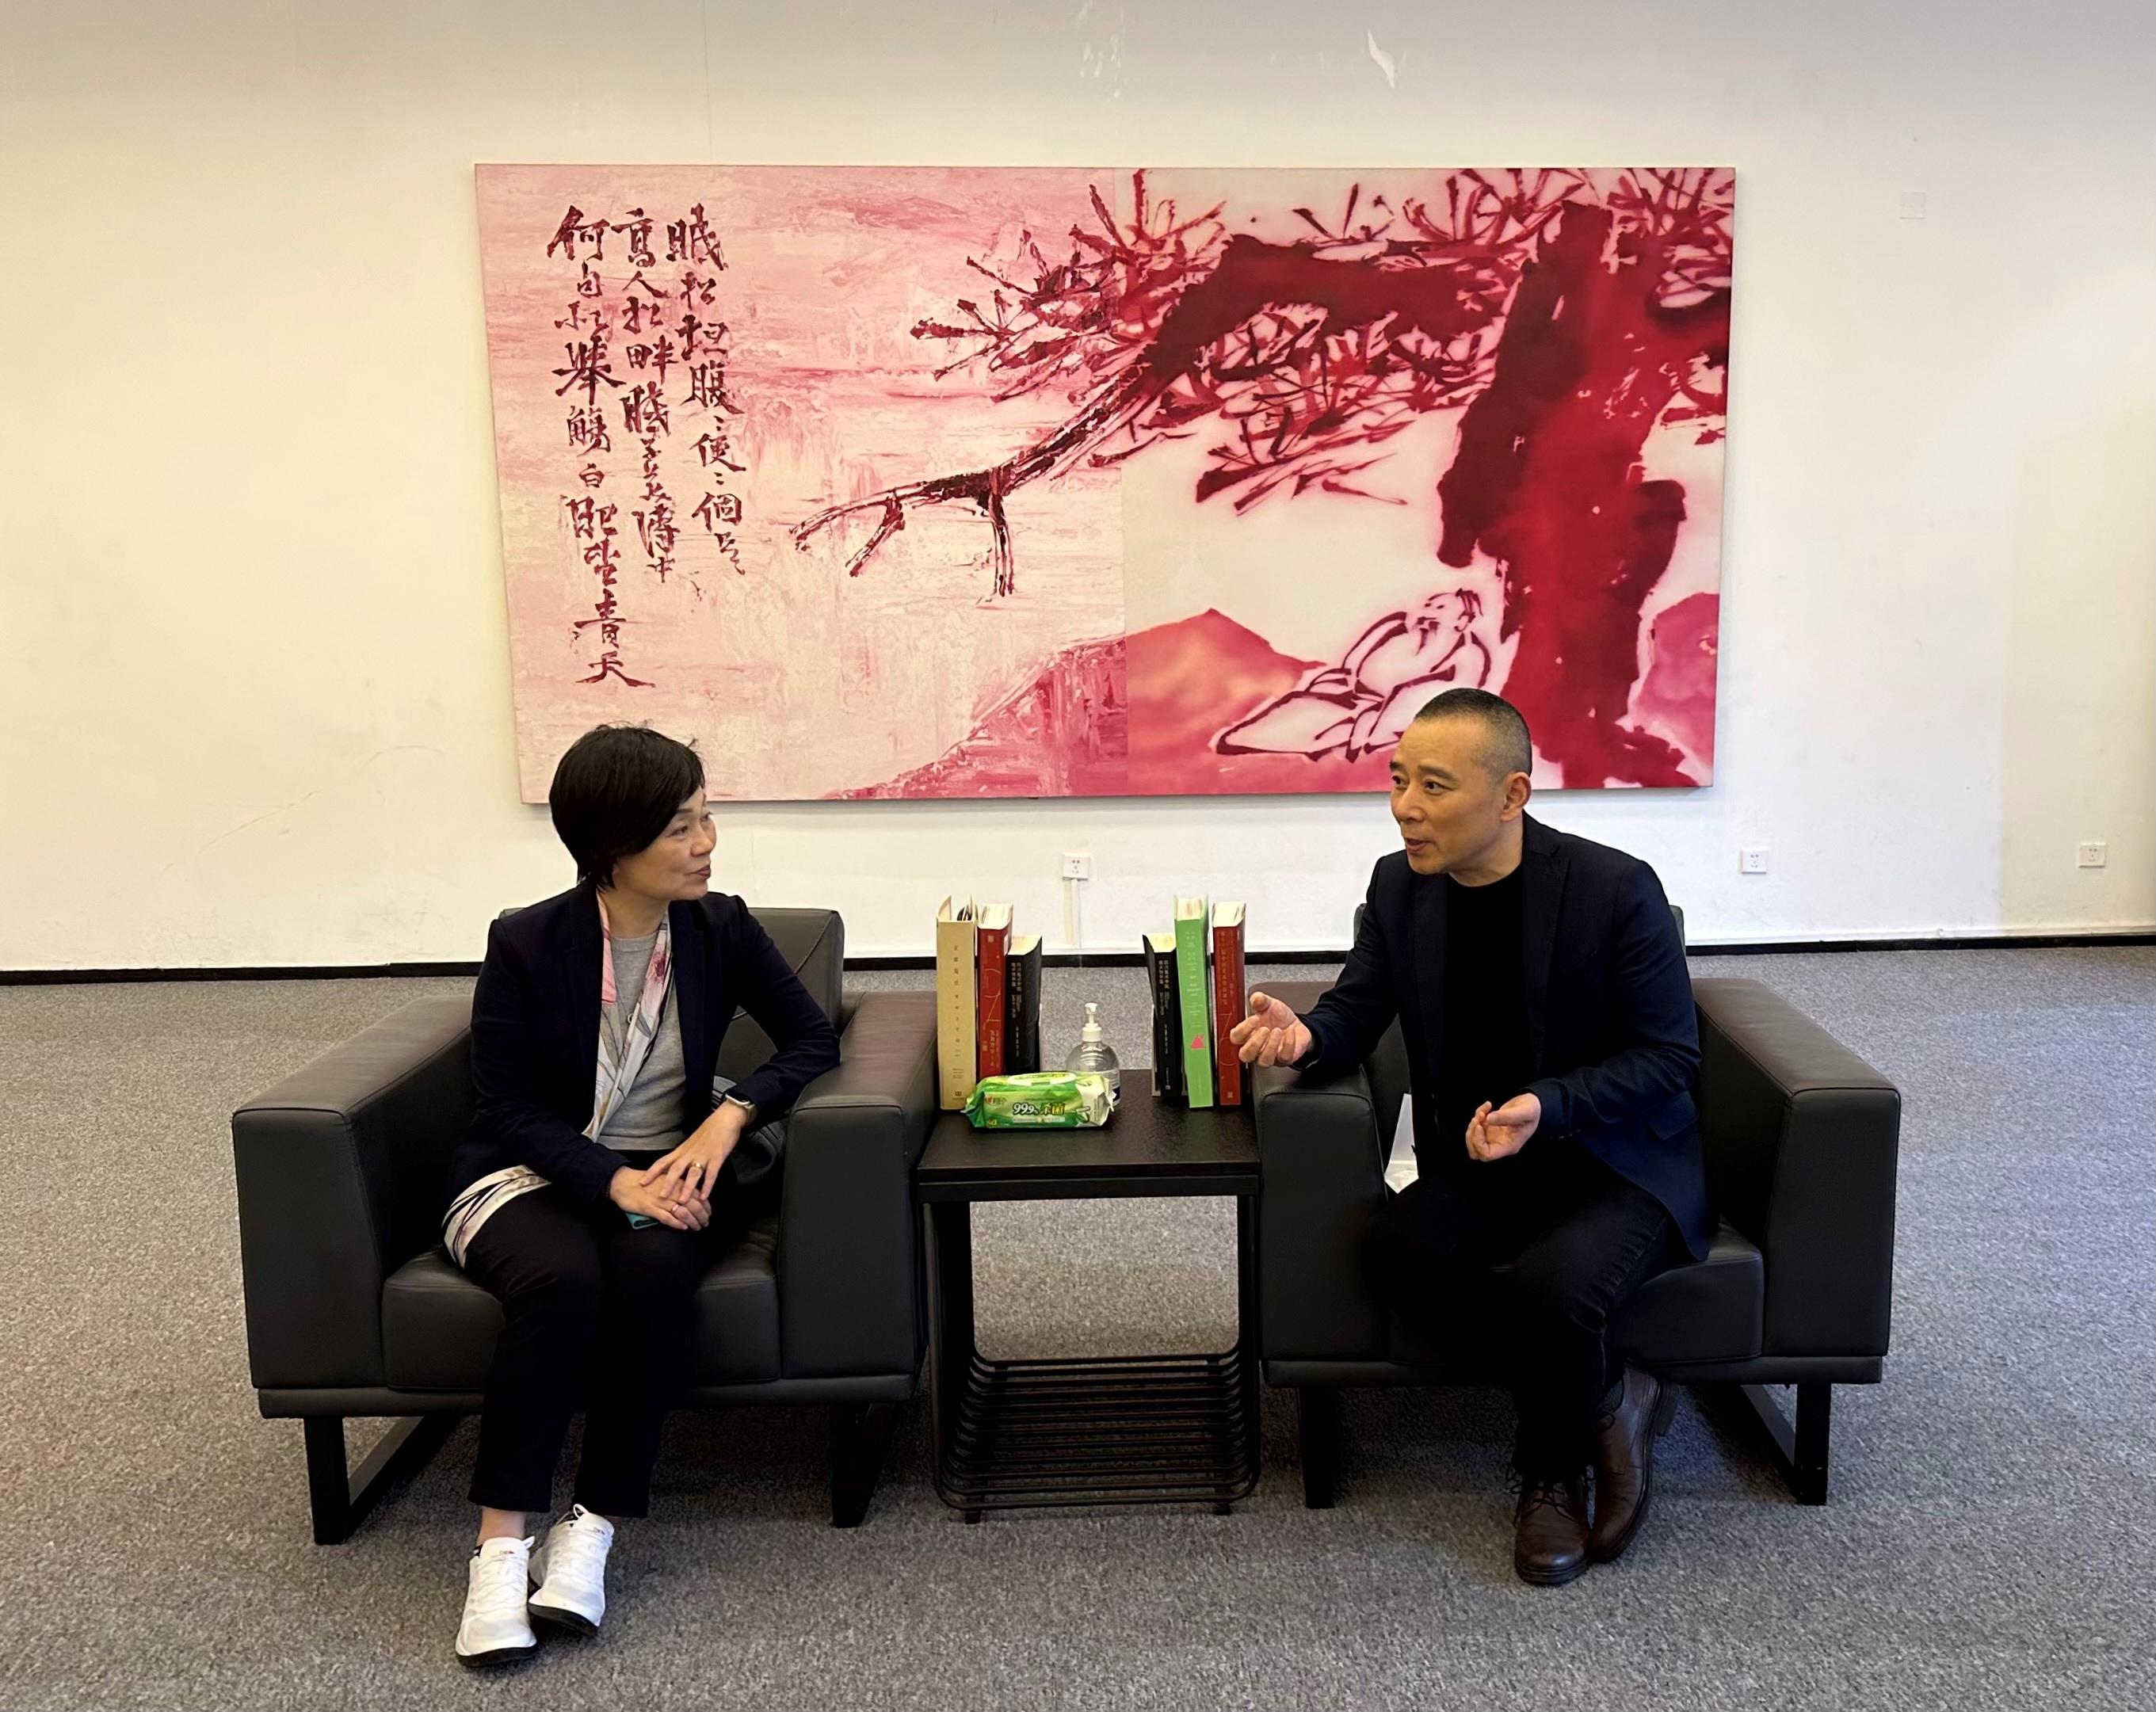 The Secretary for Education, Dr Choi Yuk-lin (left), visits the Sichuan Fine Arts Institute today (April 25) and meets its vice president, Mr Jiao Xingtao (right).